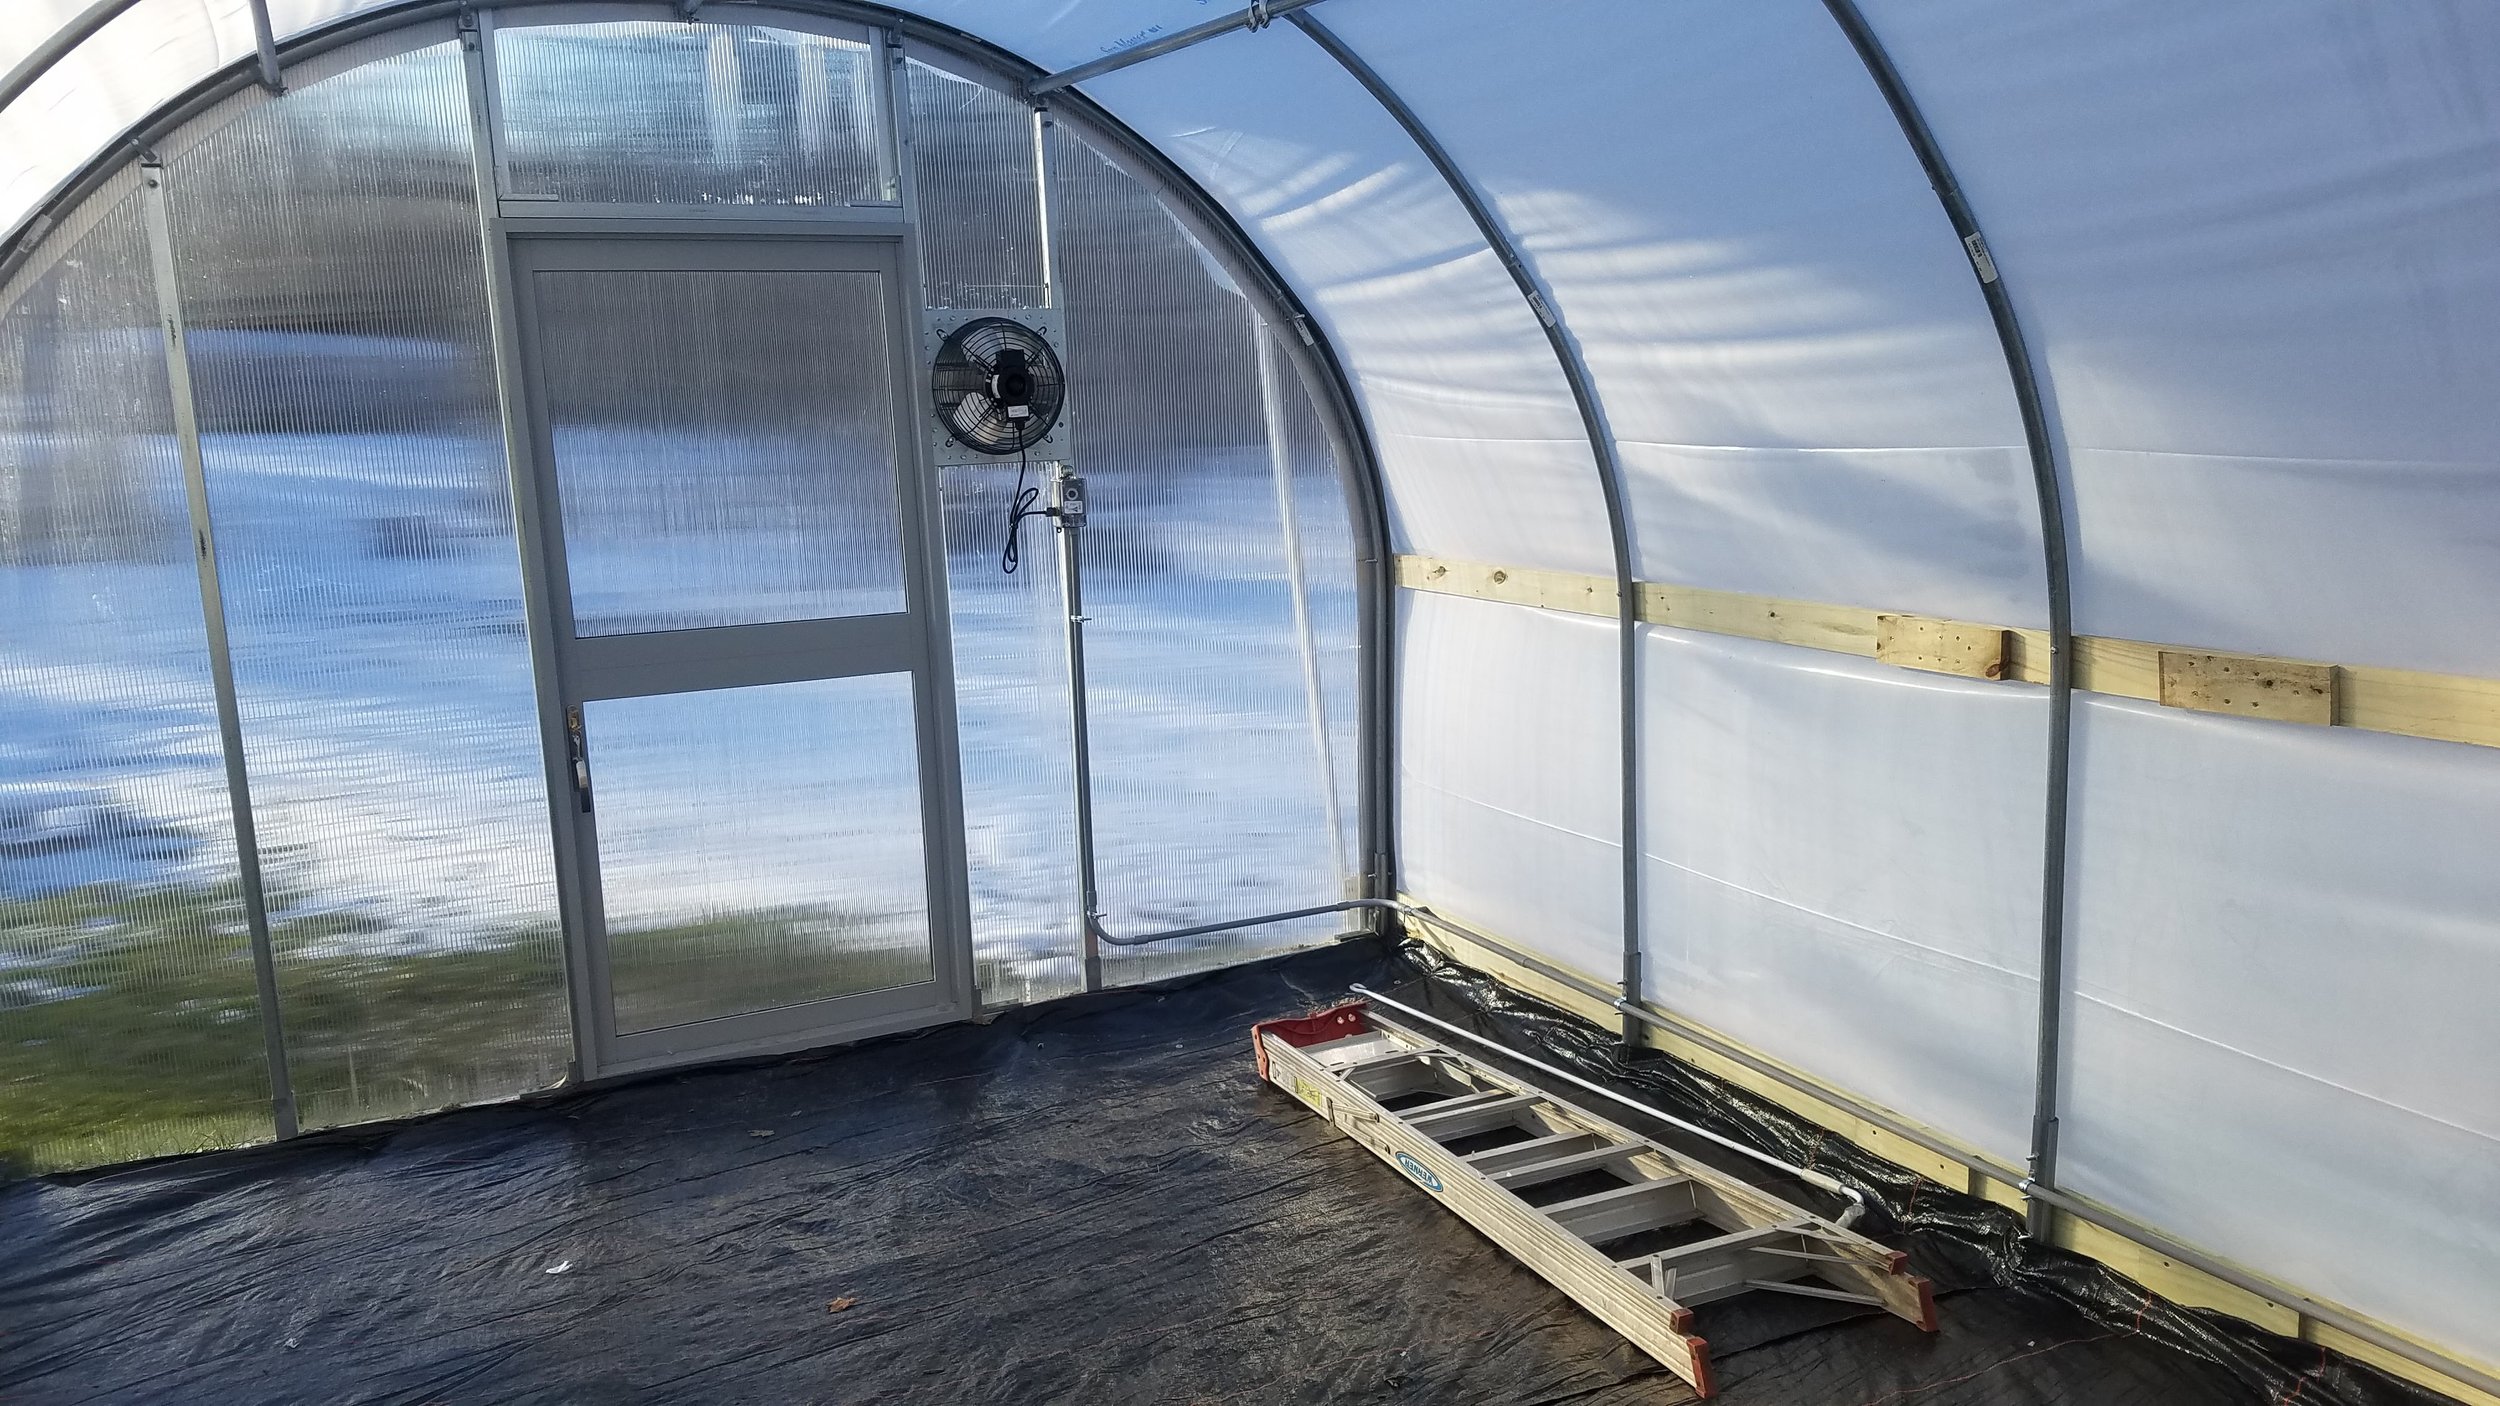 Greenhouse just about finished. Electric power added!